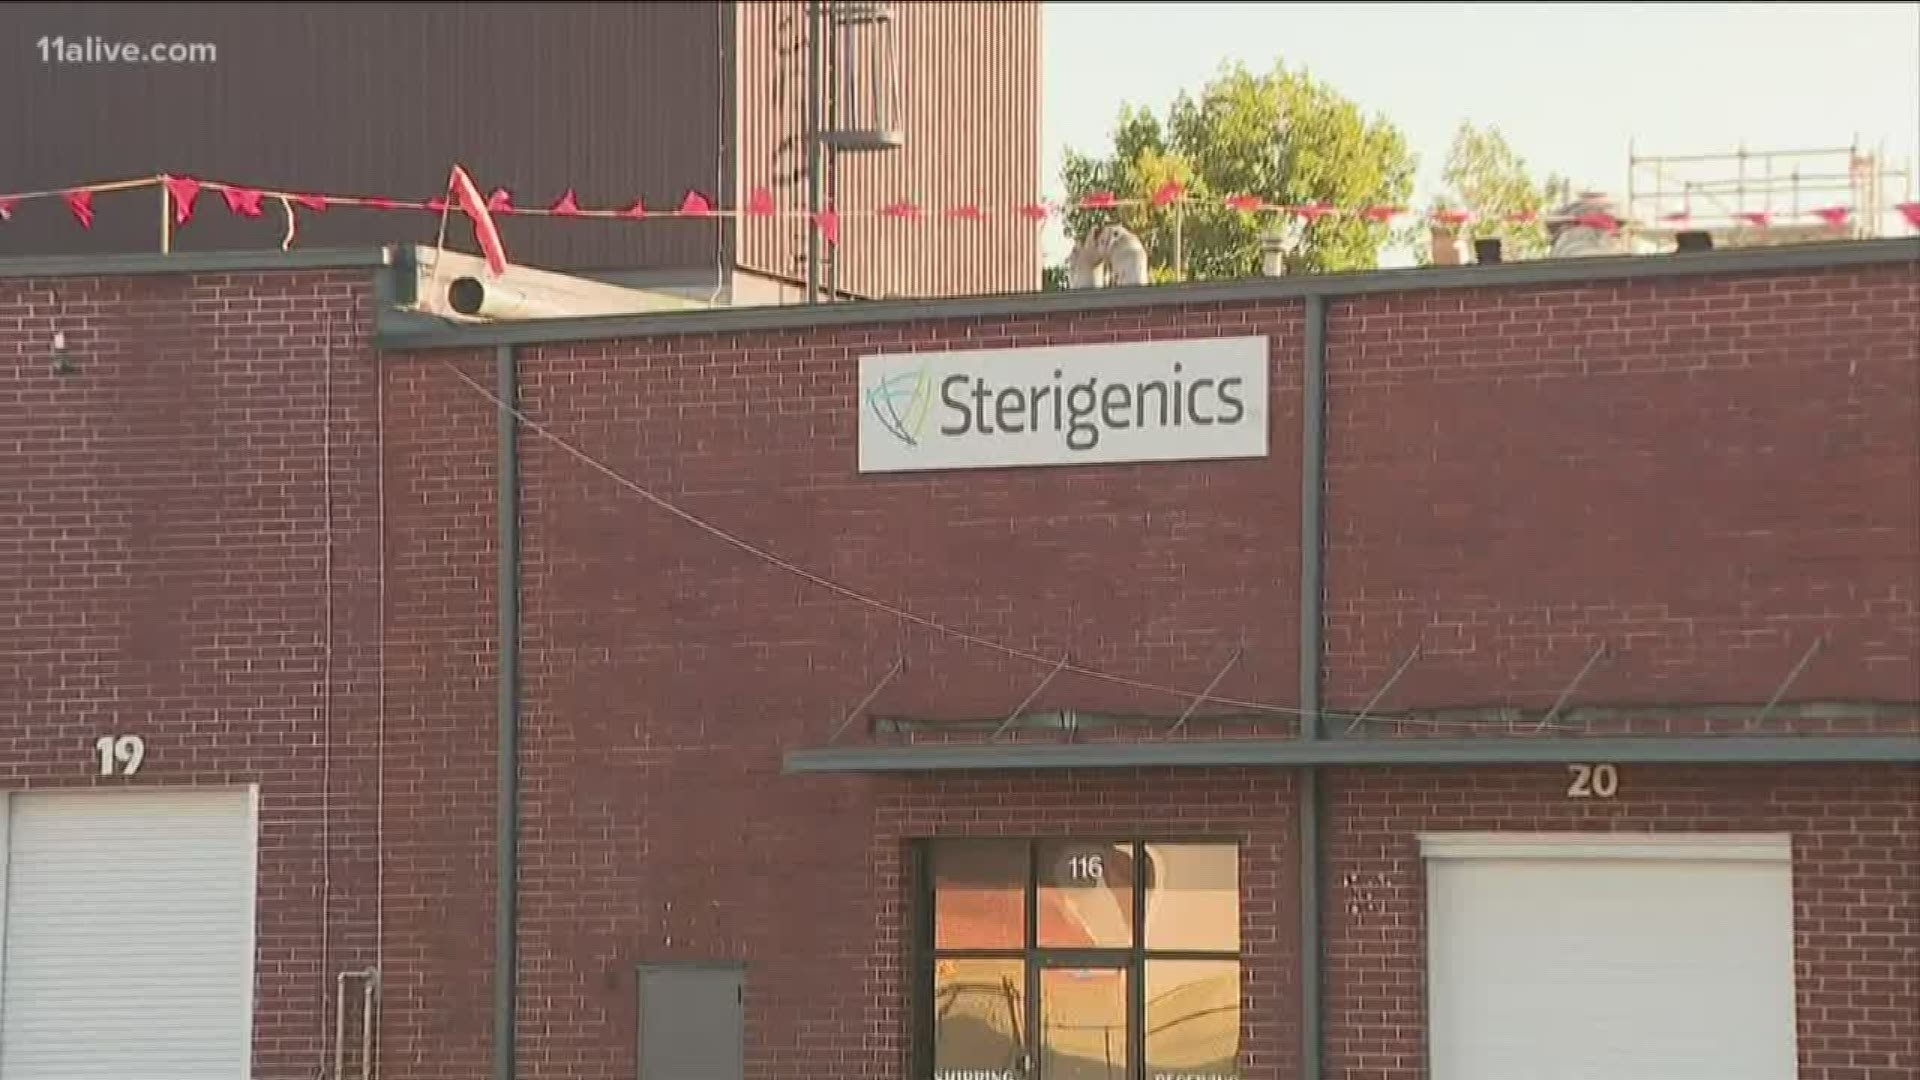 Sterigenics came under fire earlier this summer after a report from WebMD highlighted its release of ethylene oxide which is linked to increased cancer risk.